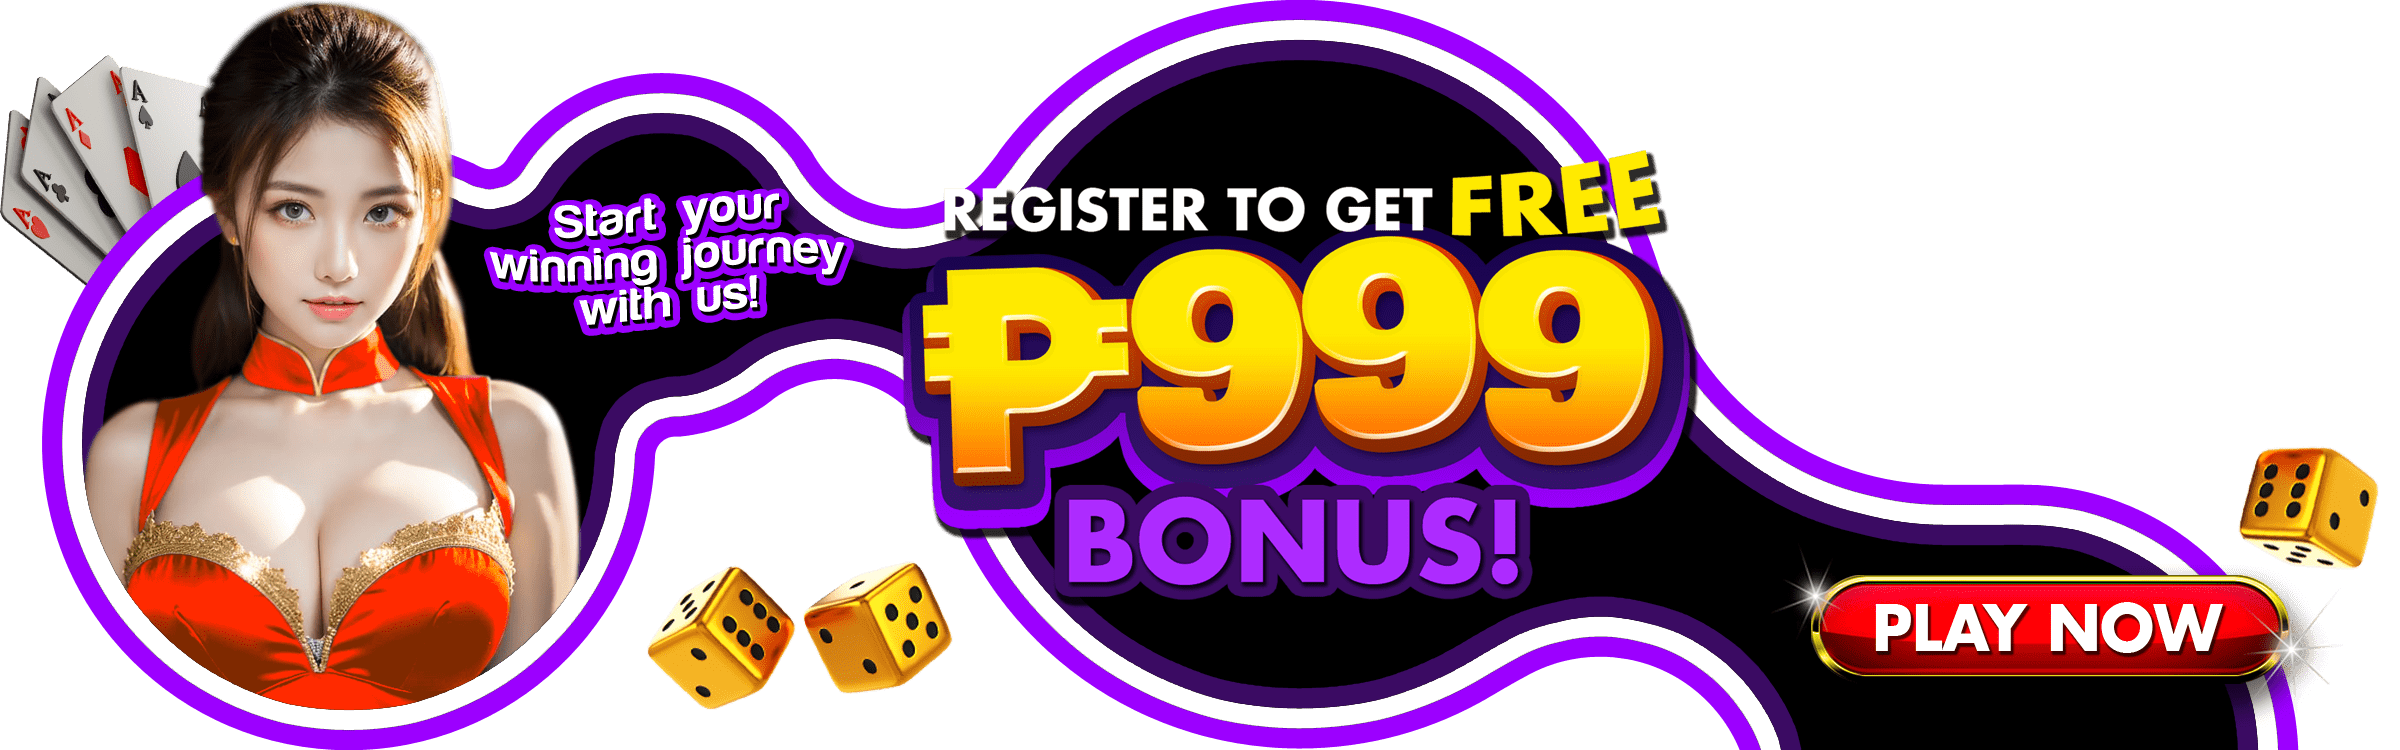 register to get free P999